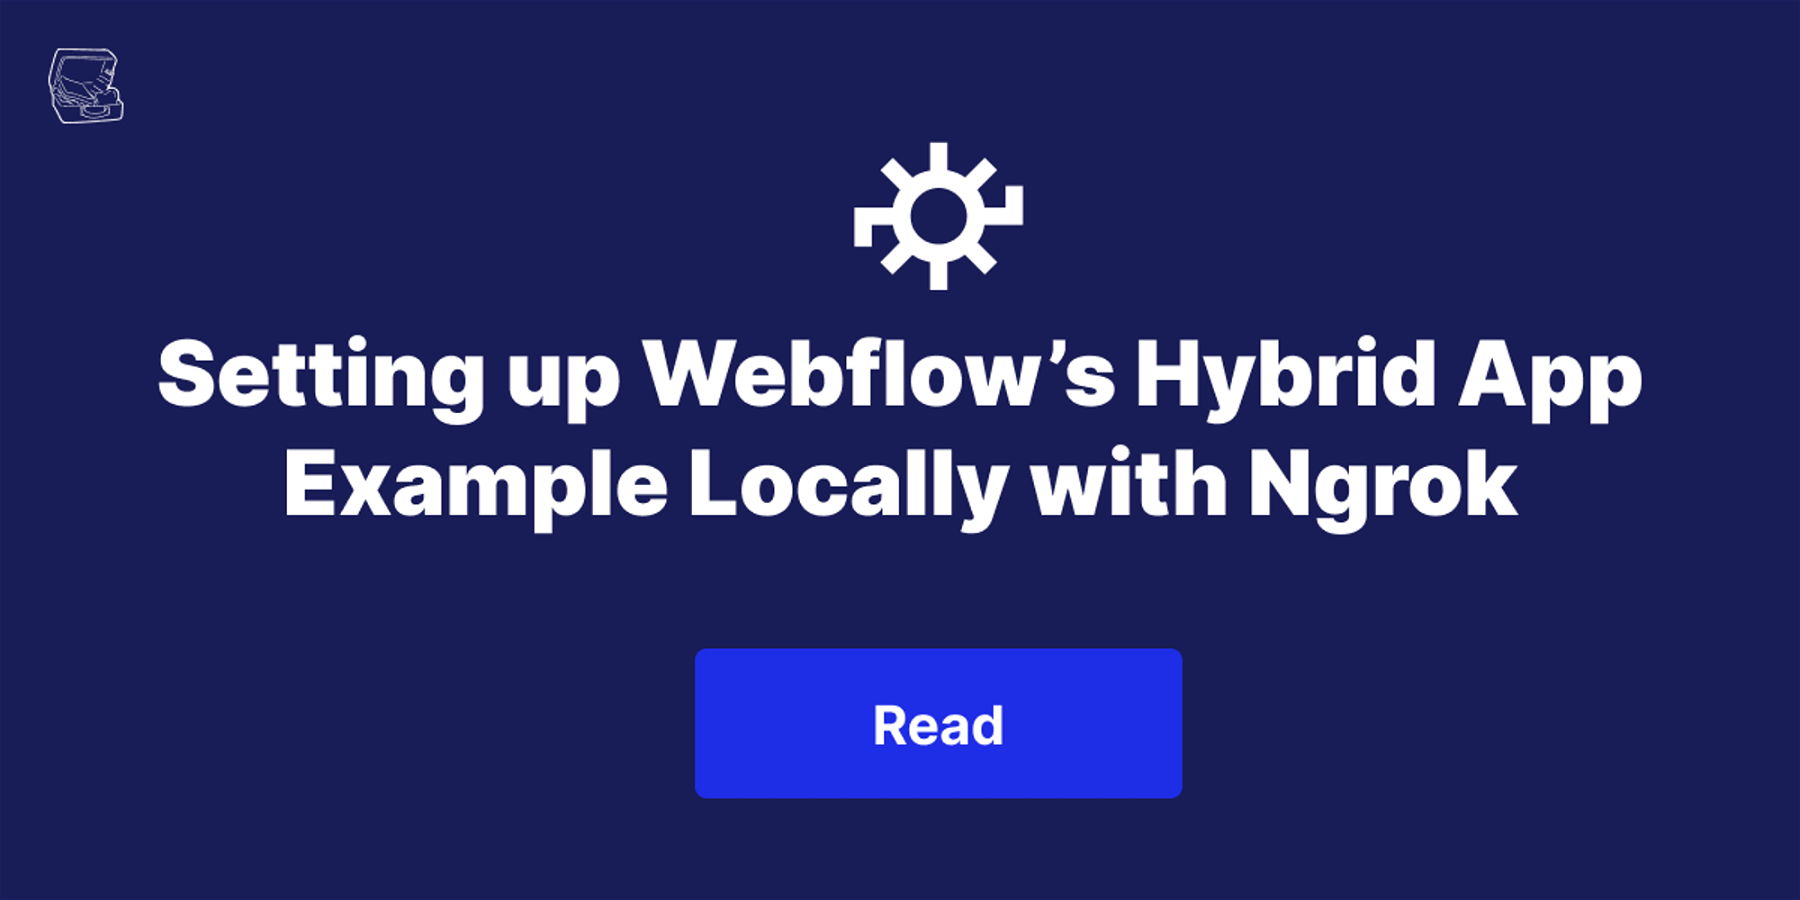 Setting up Webflow’s hybrid app example locally with Ngrok